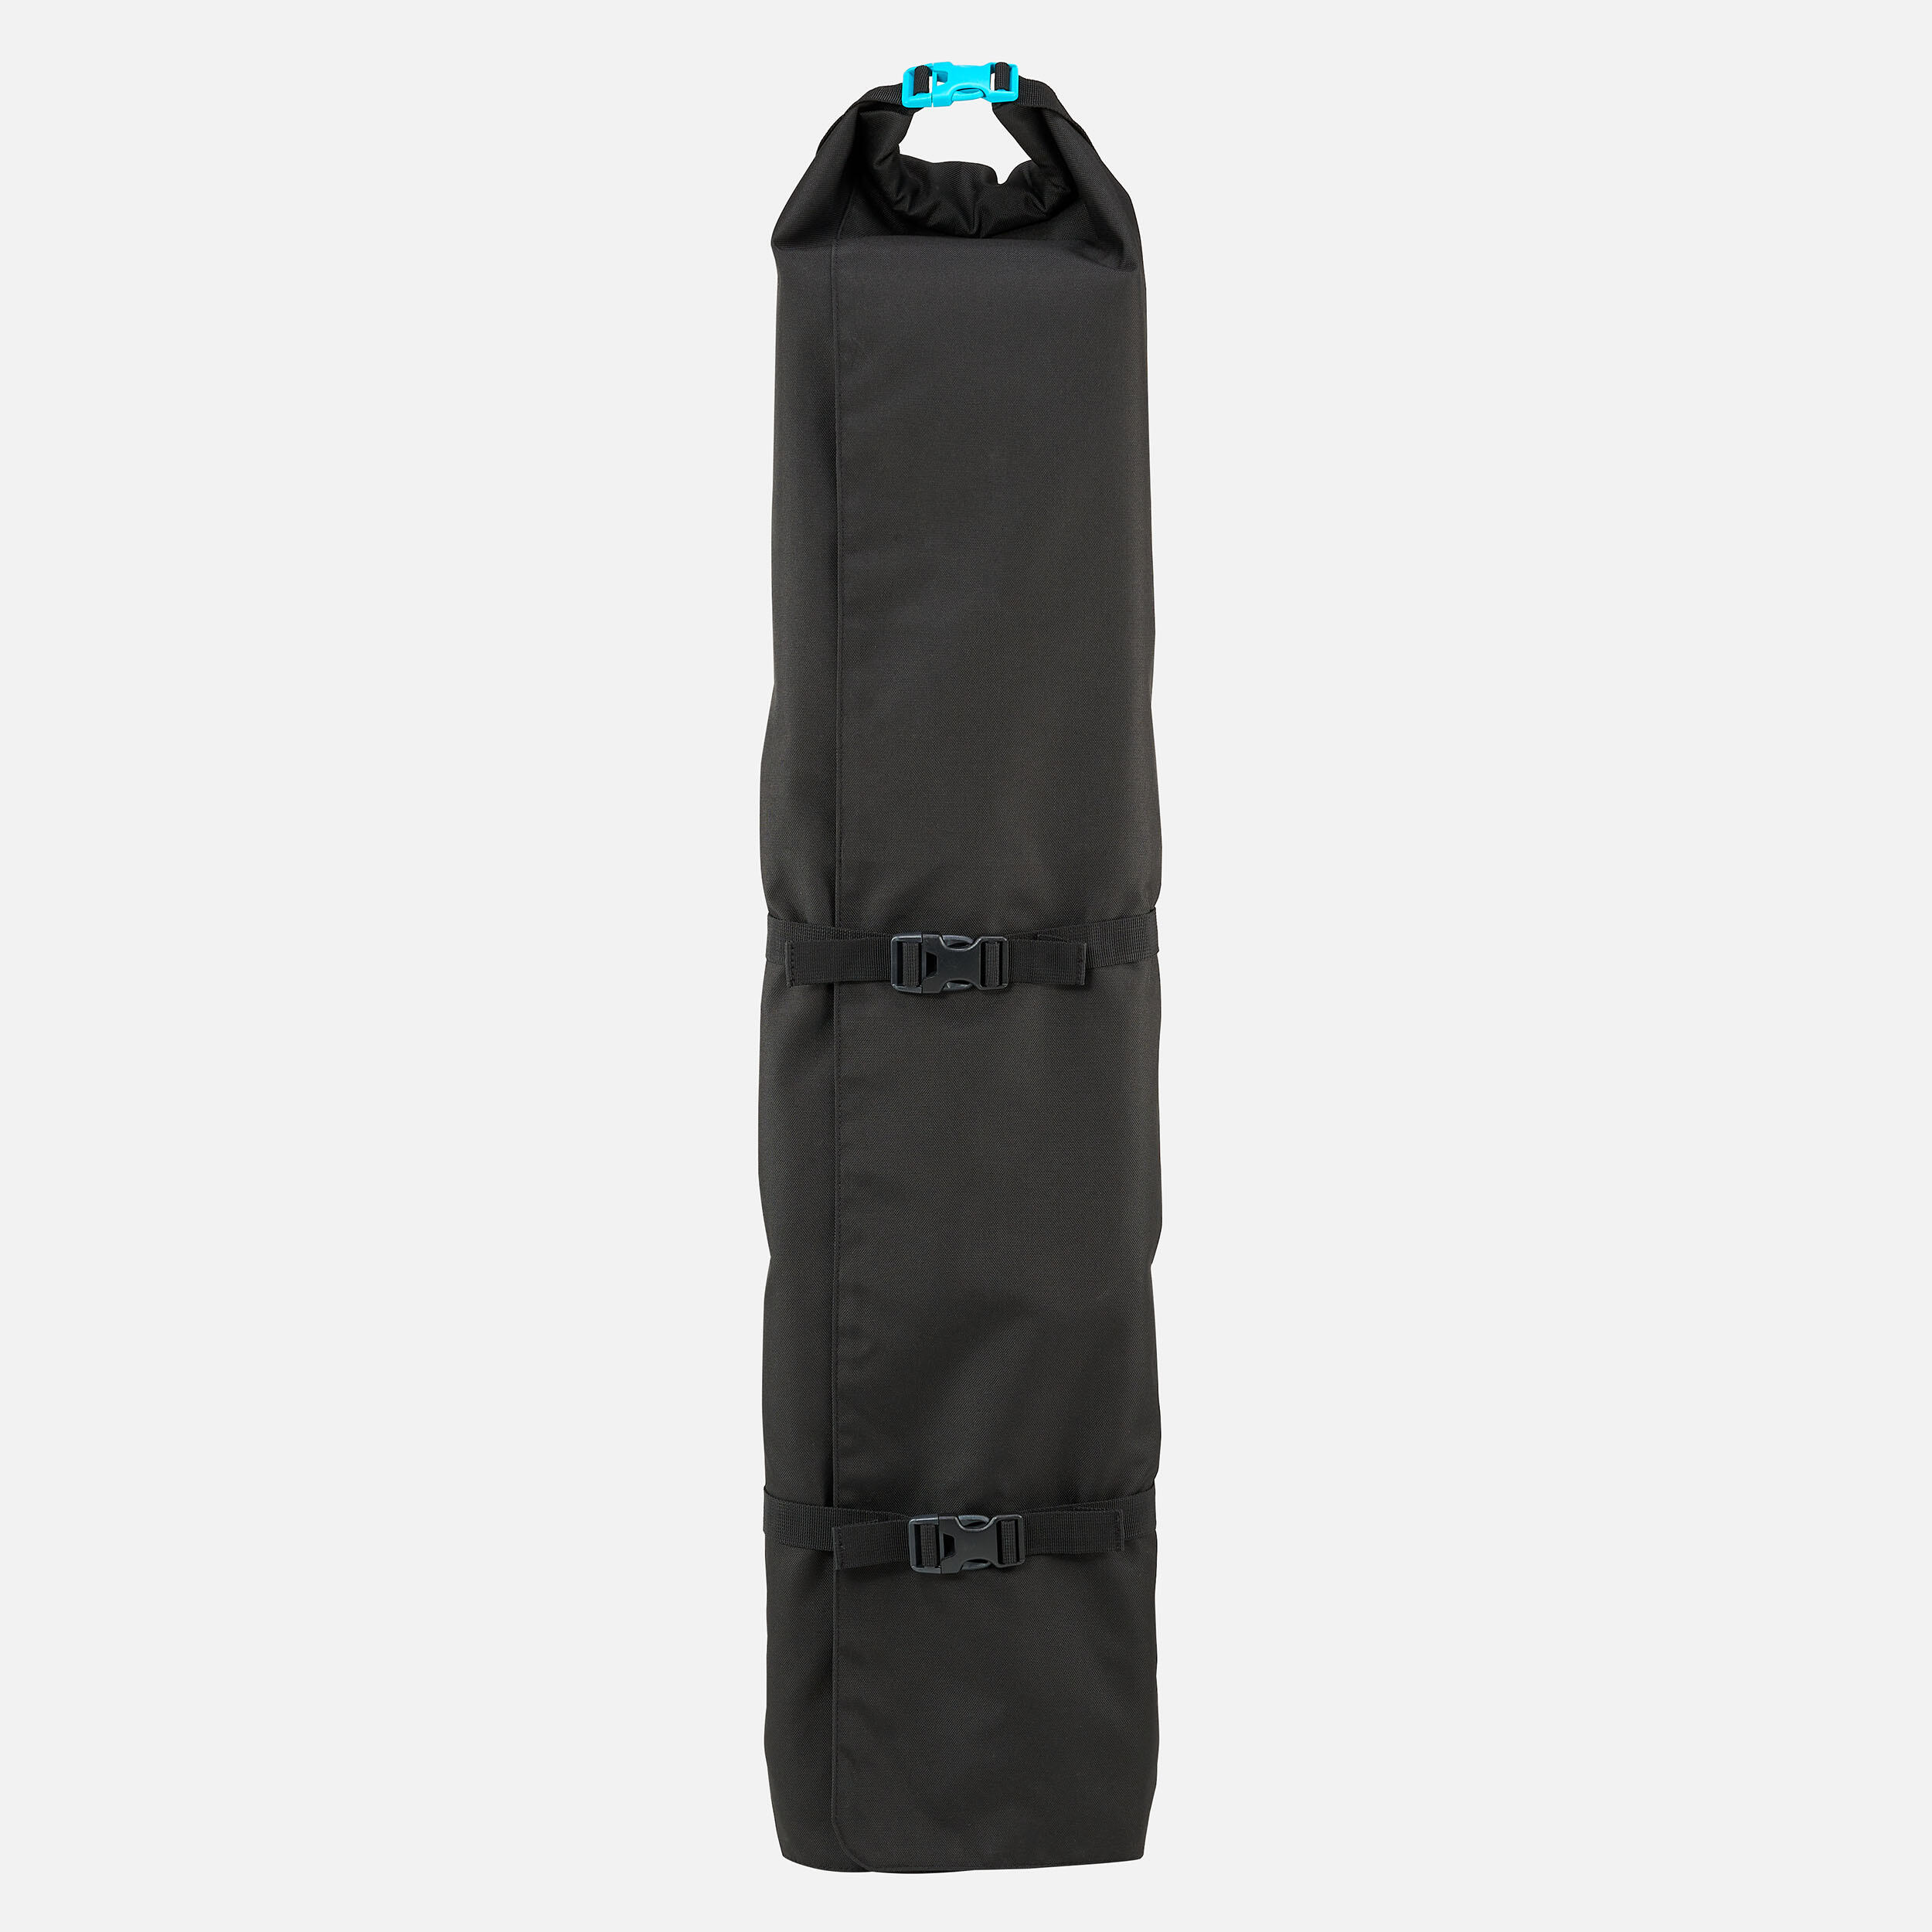 CROSS-COUNTRY SKI COVER - 150 COMPACT 7/10